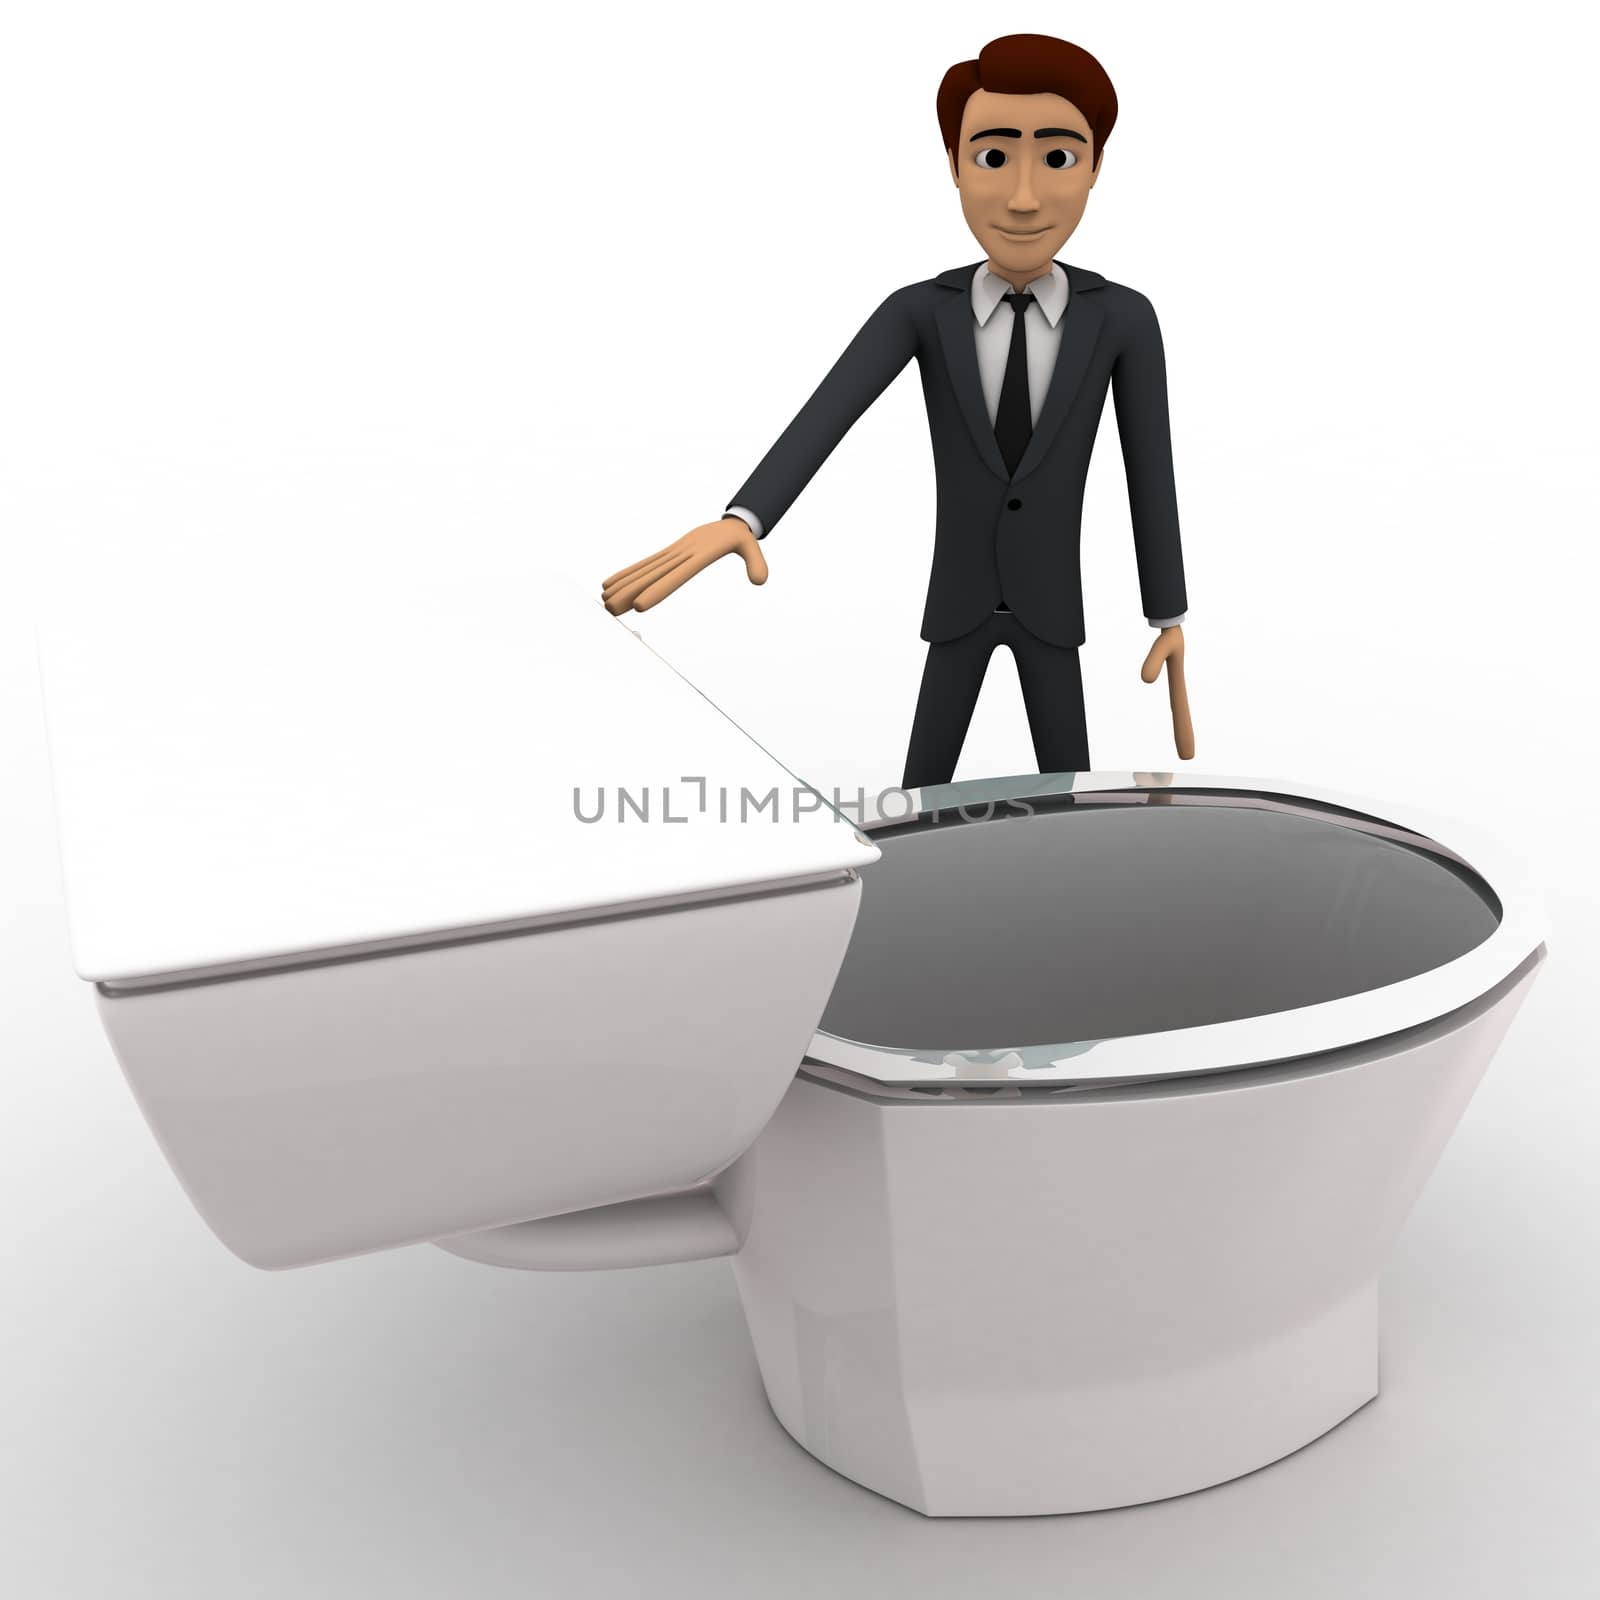 3d man with toilet seat concept on white background, front angle view